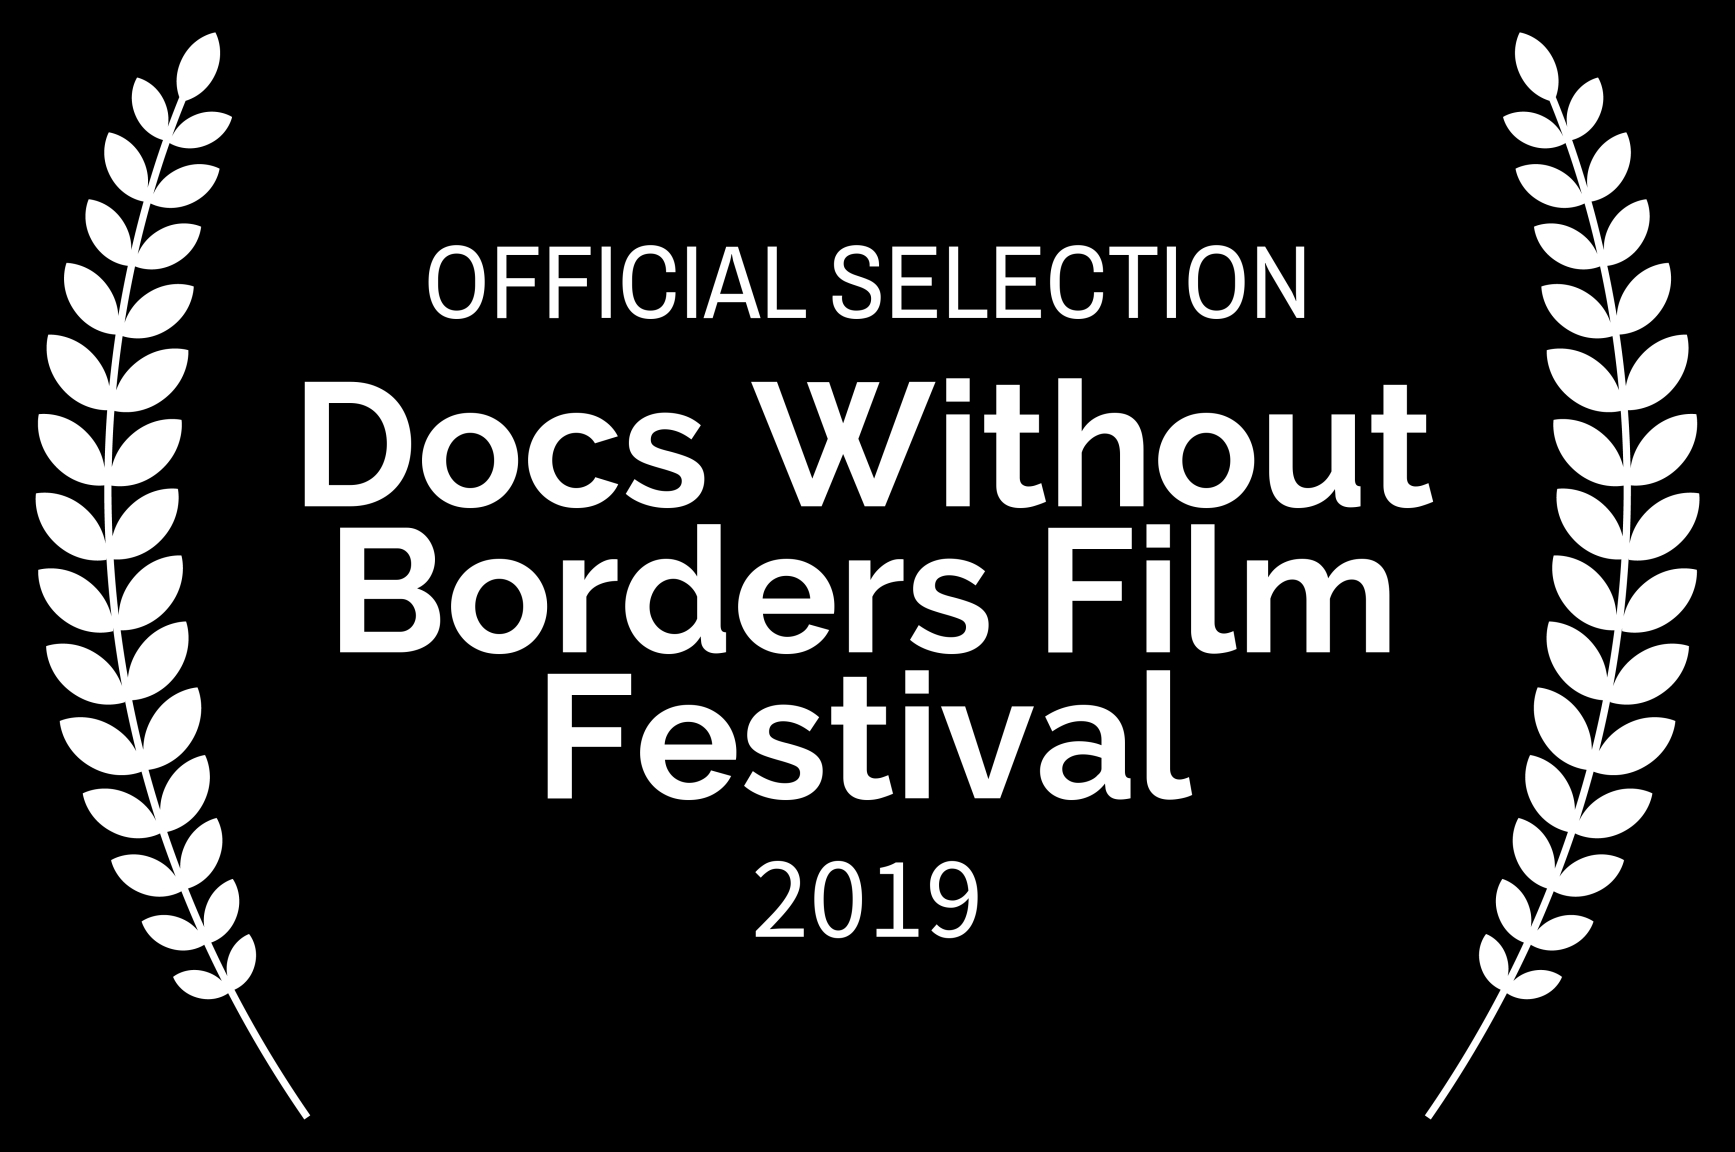 "Under the Whale" / Official Selection: Docs Without Borders Film Festival 2019